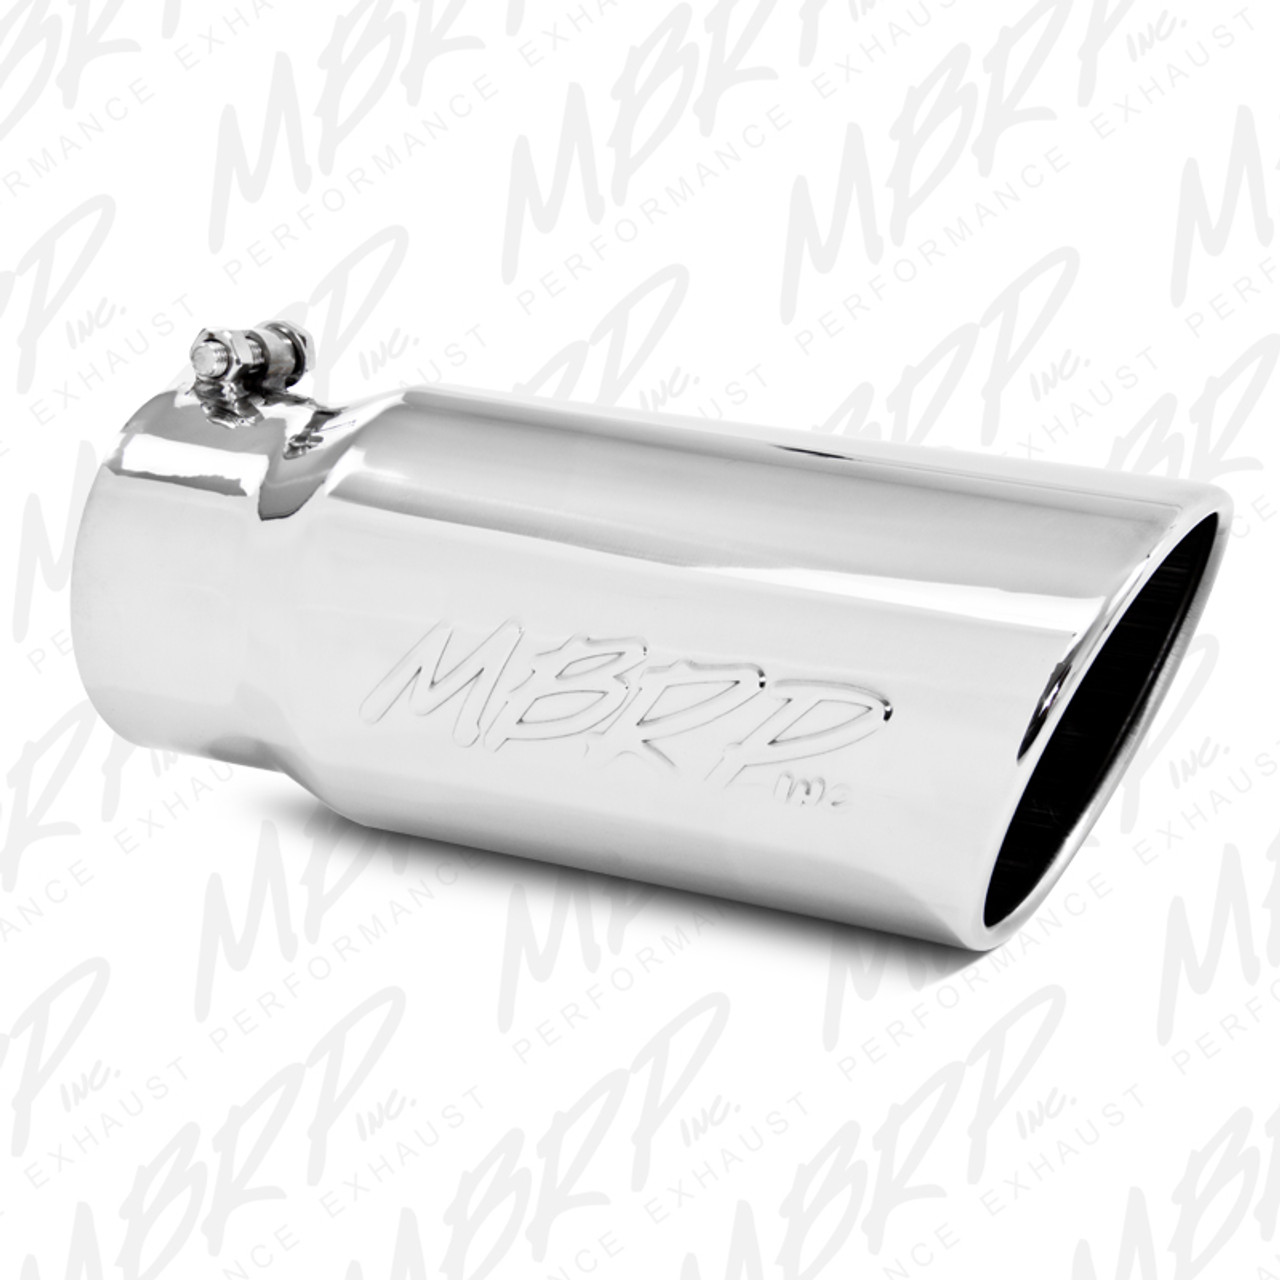 S6100409 - MBRP 4" STAINLESS STEEL EXHAUST 1998-2002 DODGE DIESEL